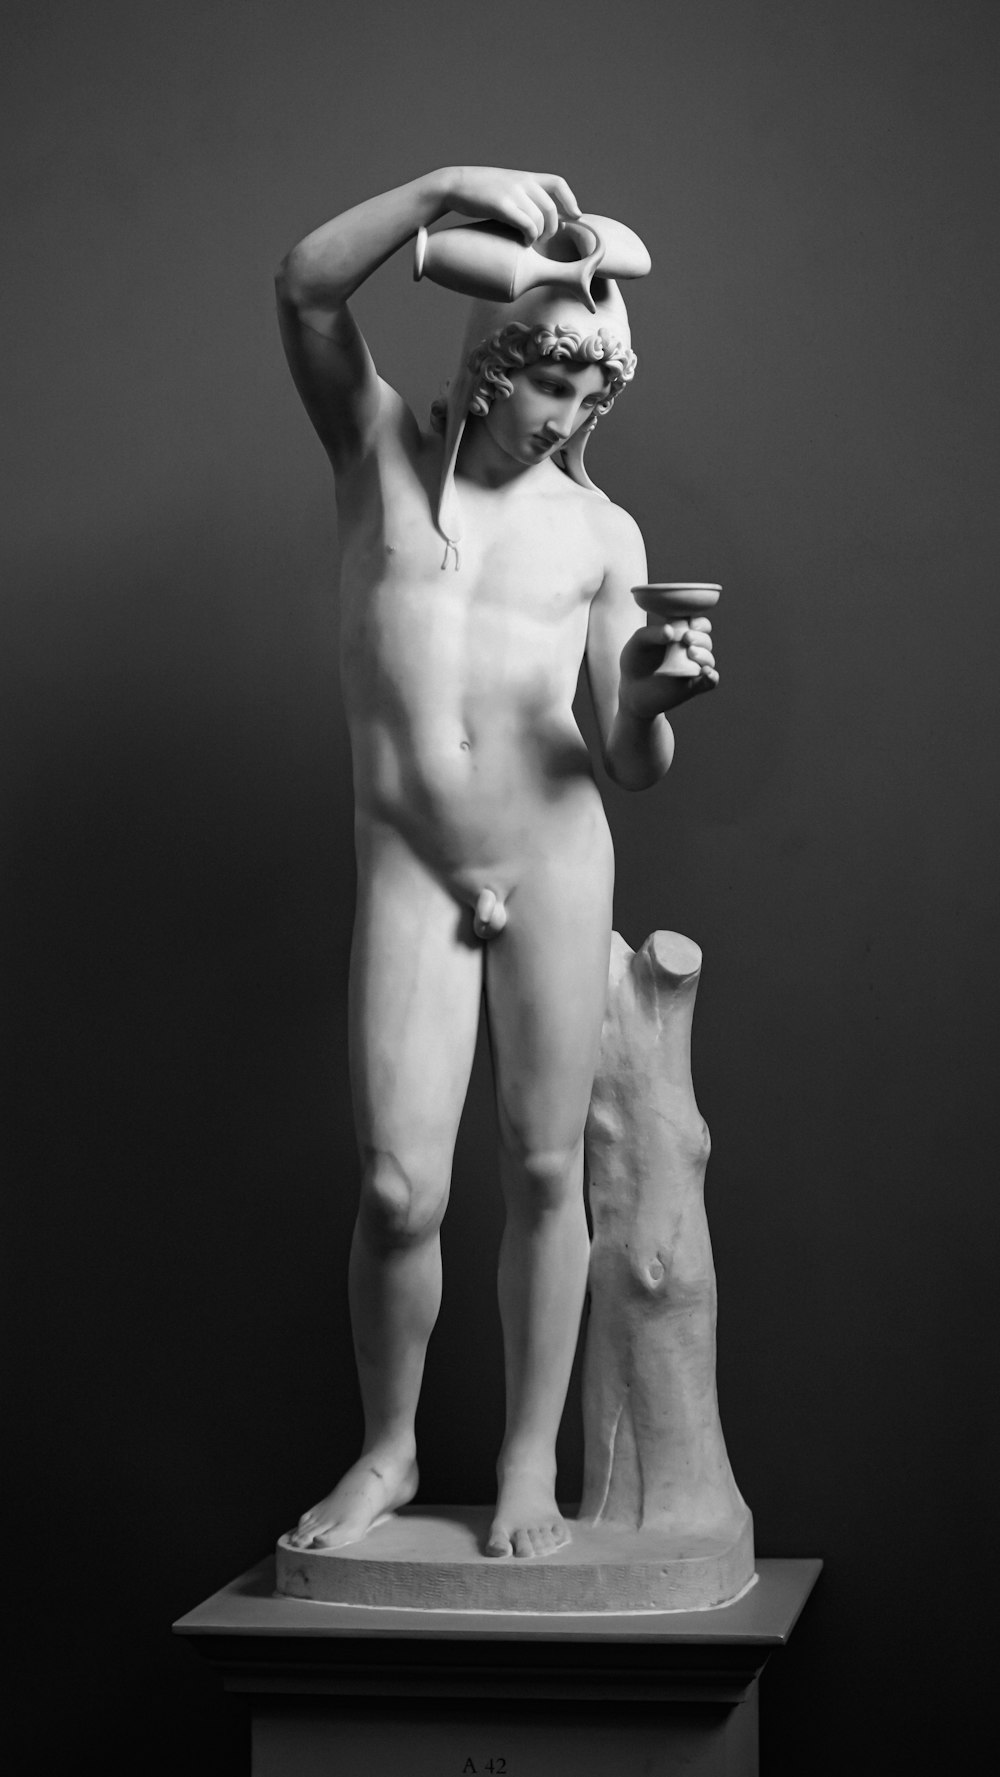 a black and white photo of a statue of a man holding a cup